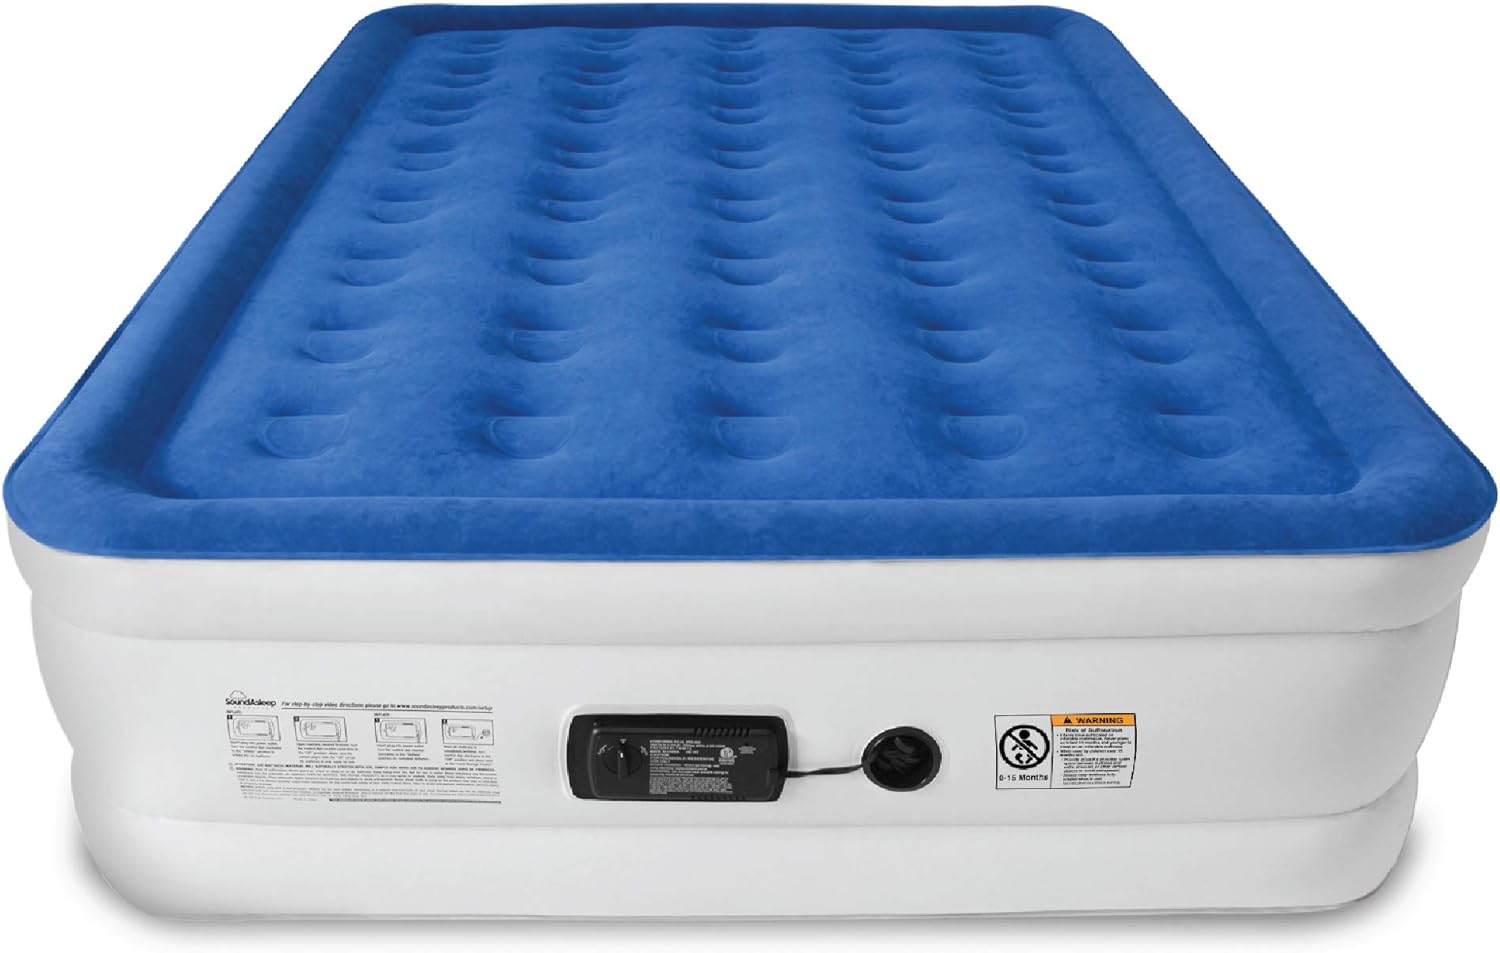 I discovered SoundAsleep in the New York Times Wirecutter listing as best air mattress and completely agree with their assessment: Our top pick since 2016, it has the best combination of comfort, customer service, availability, and owner satisfaction of any mattress we testedand it has the quietest motor. I found the mattress to be definitely worth the money. It' easy to set up an inflate with its built-in pump. It' nice and thick so it' comfortable and you don't feel like you're sleeping 